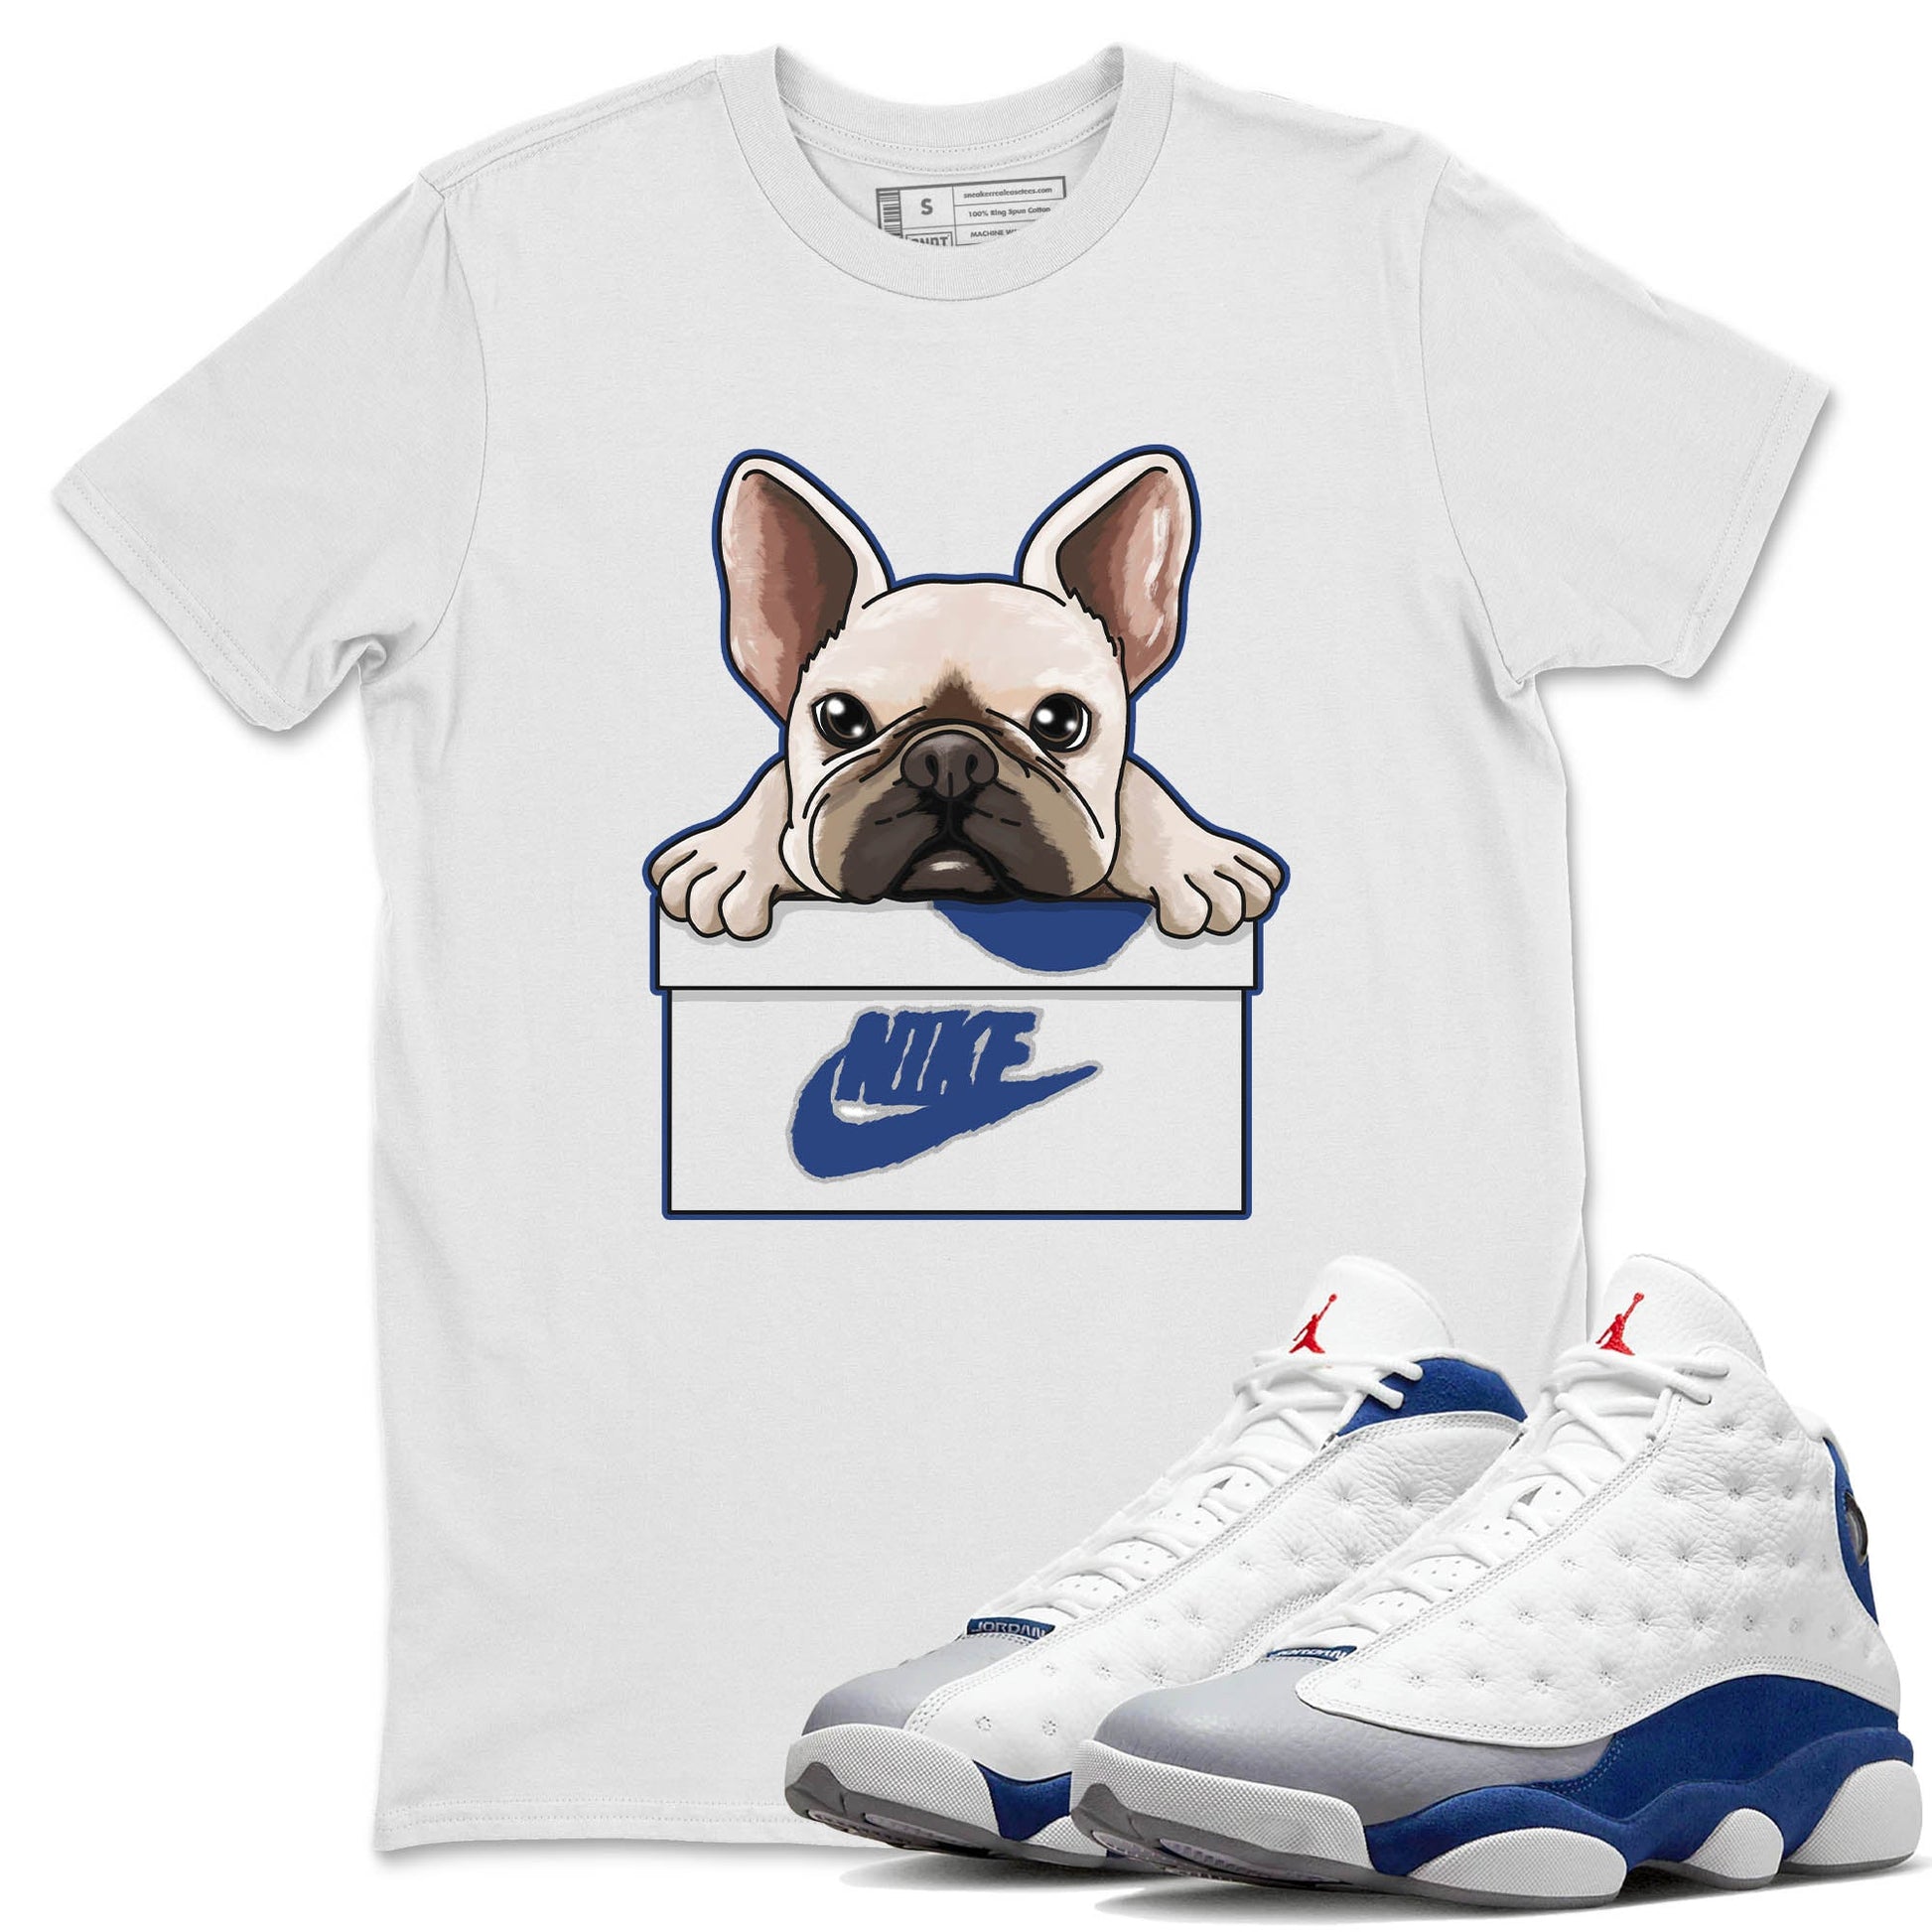 Jordan 13 French Blue Sneaker Match Tees French Bulldog Sneaker Tees Jordan 13 French Blue Sneaker Release Tees Unisex Shirts